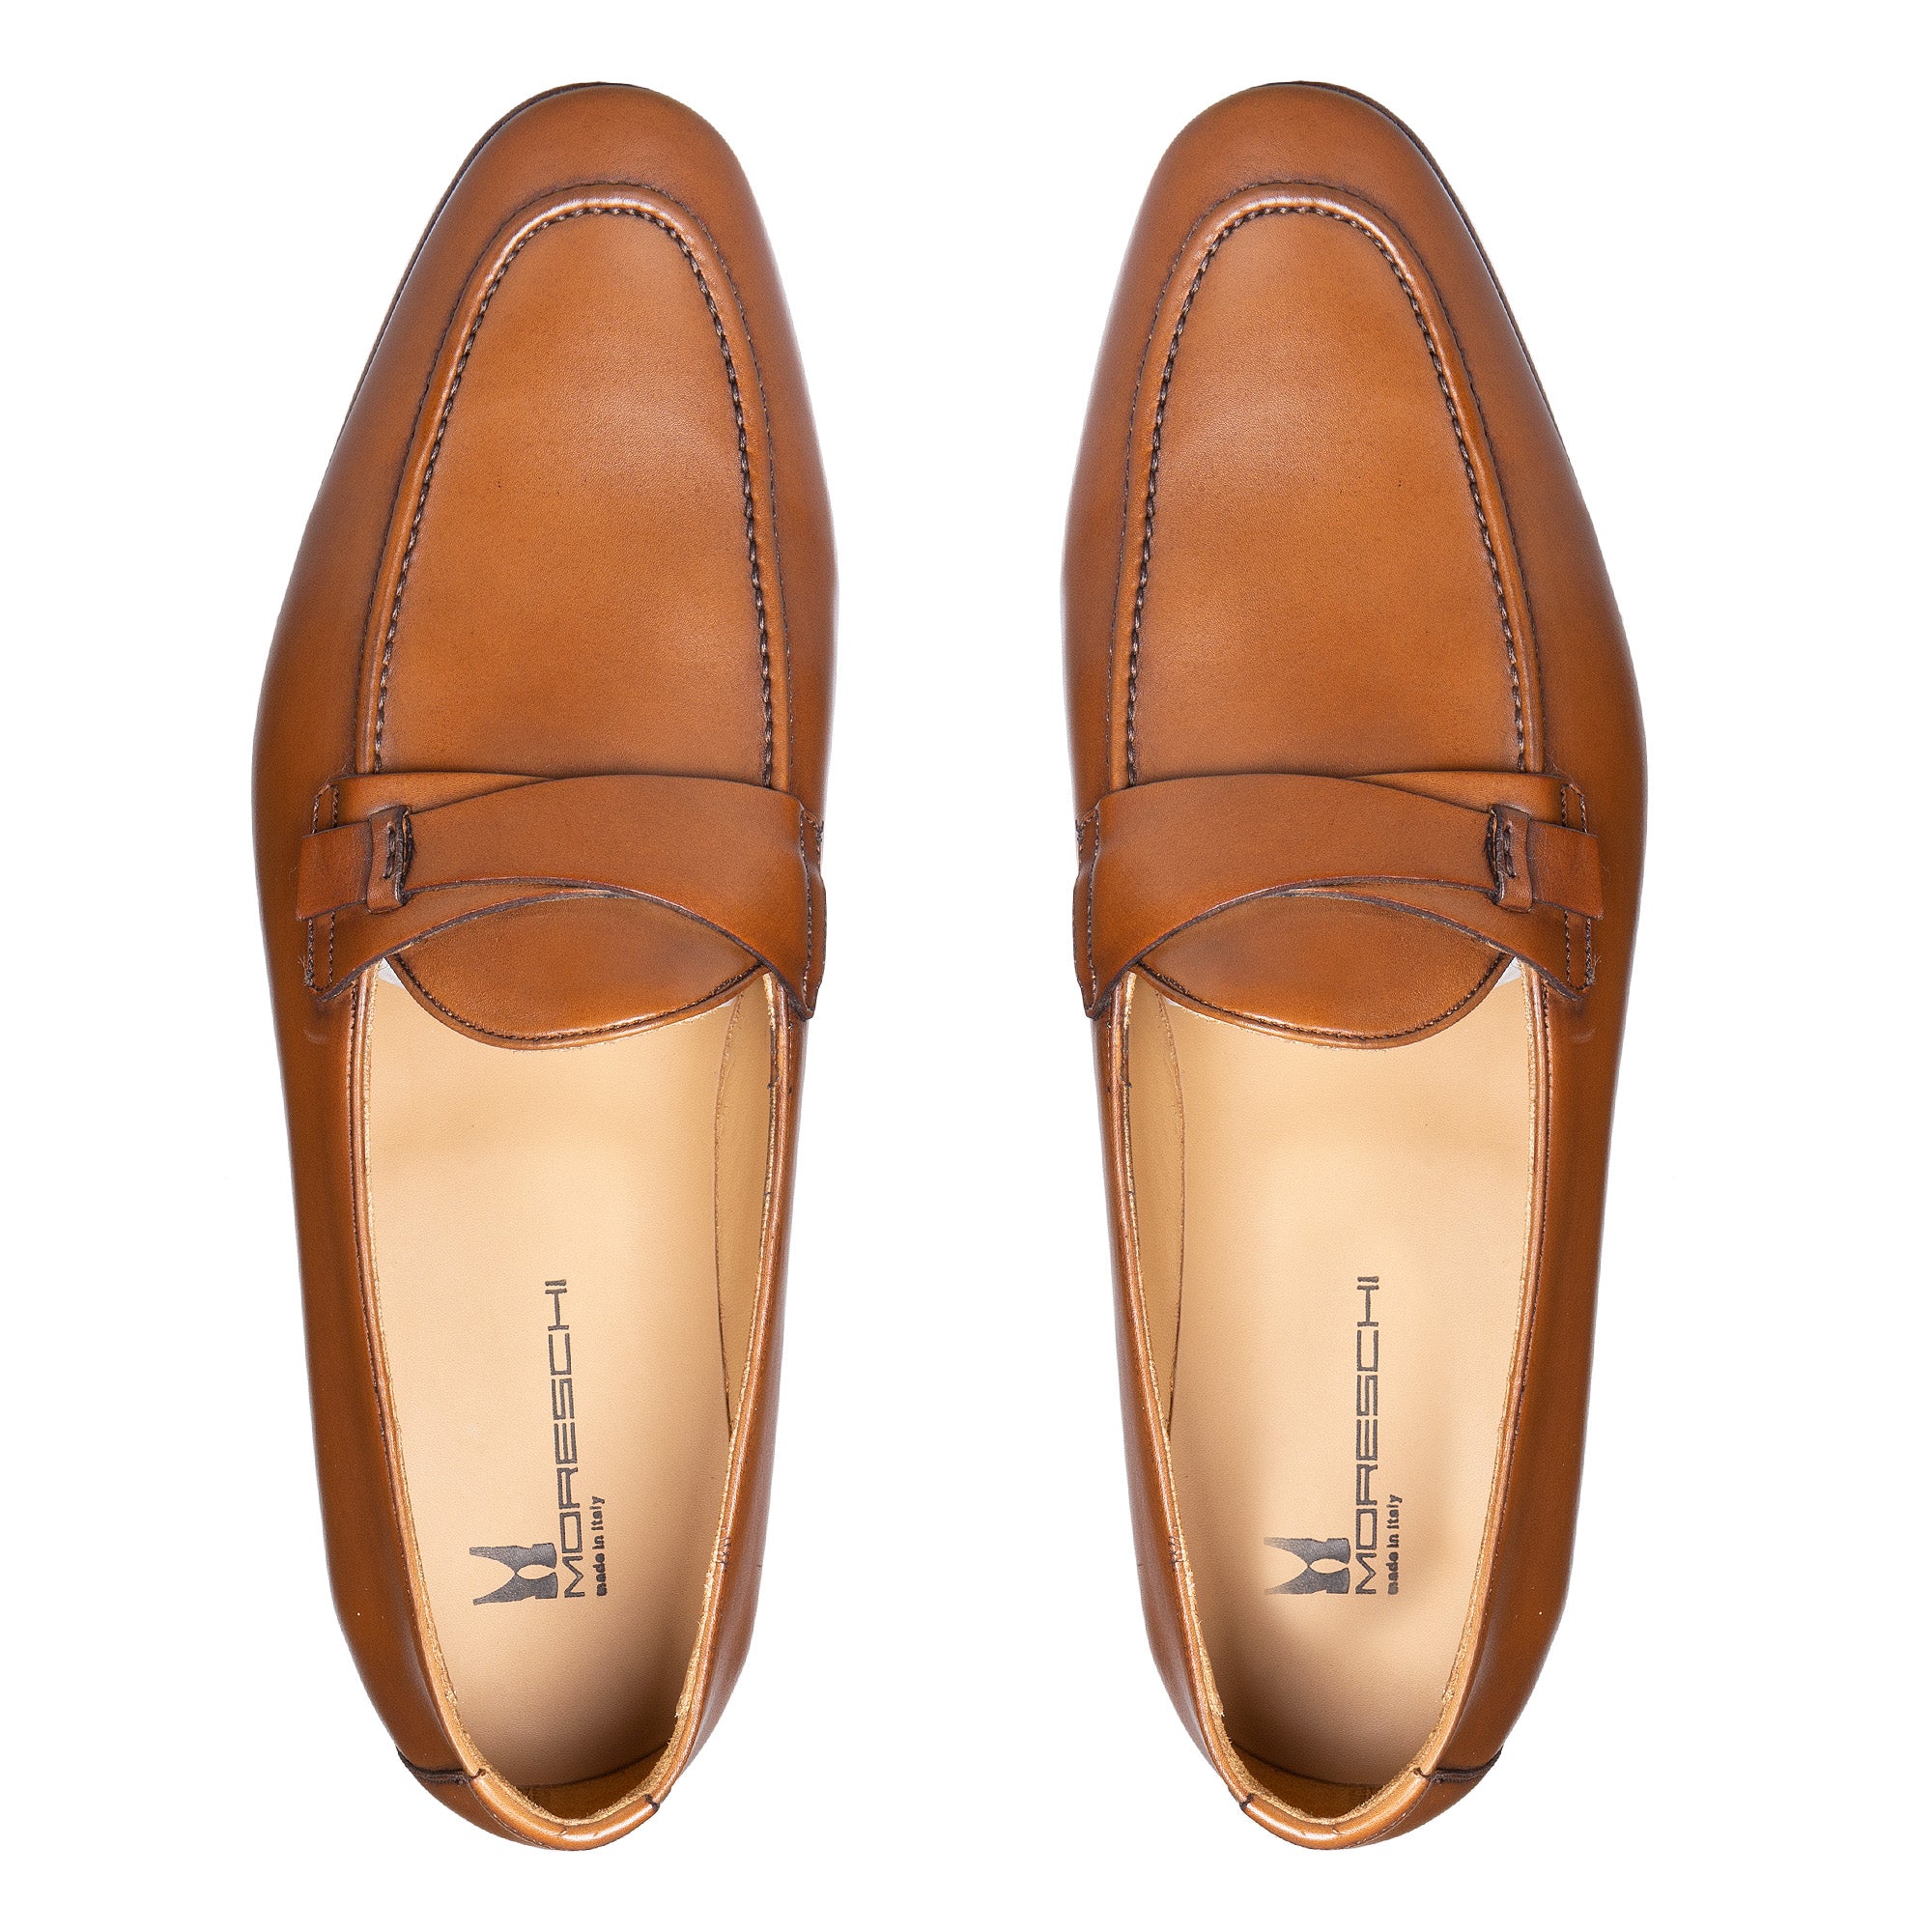 MORESCHI LOAFER LEATHER SHOES BRANDY